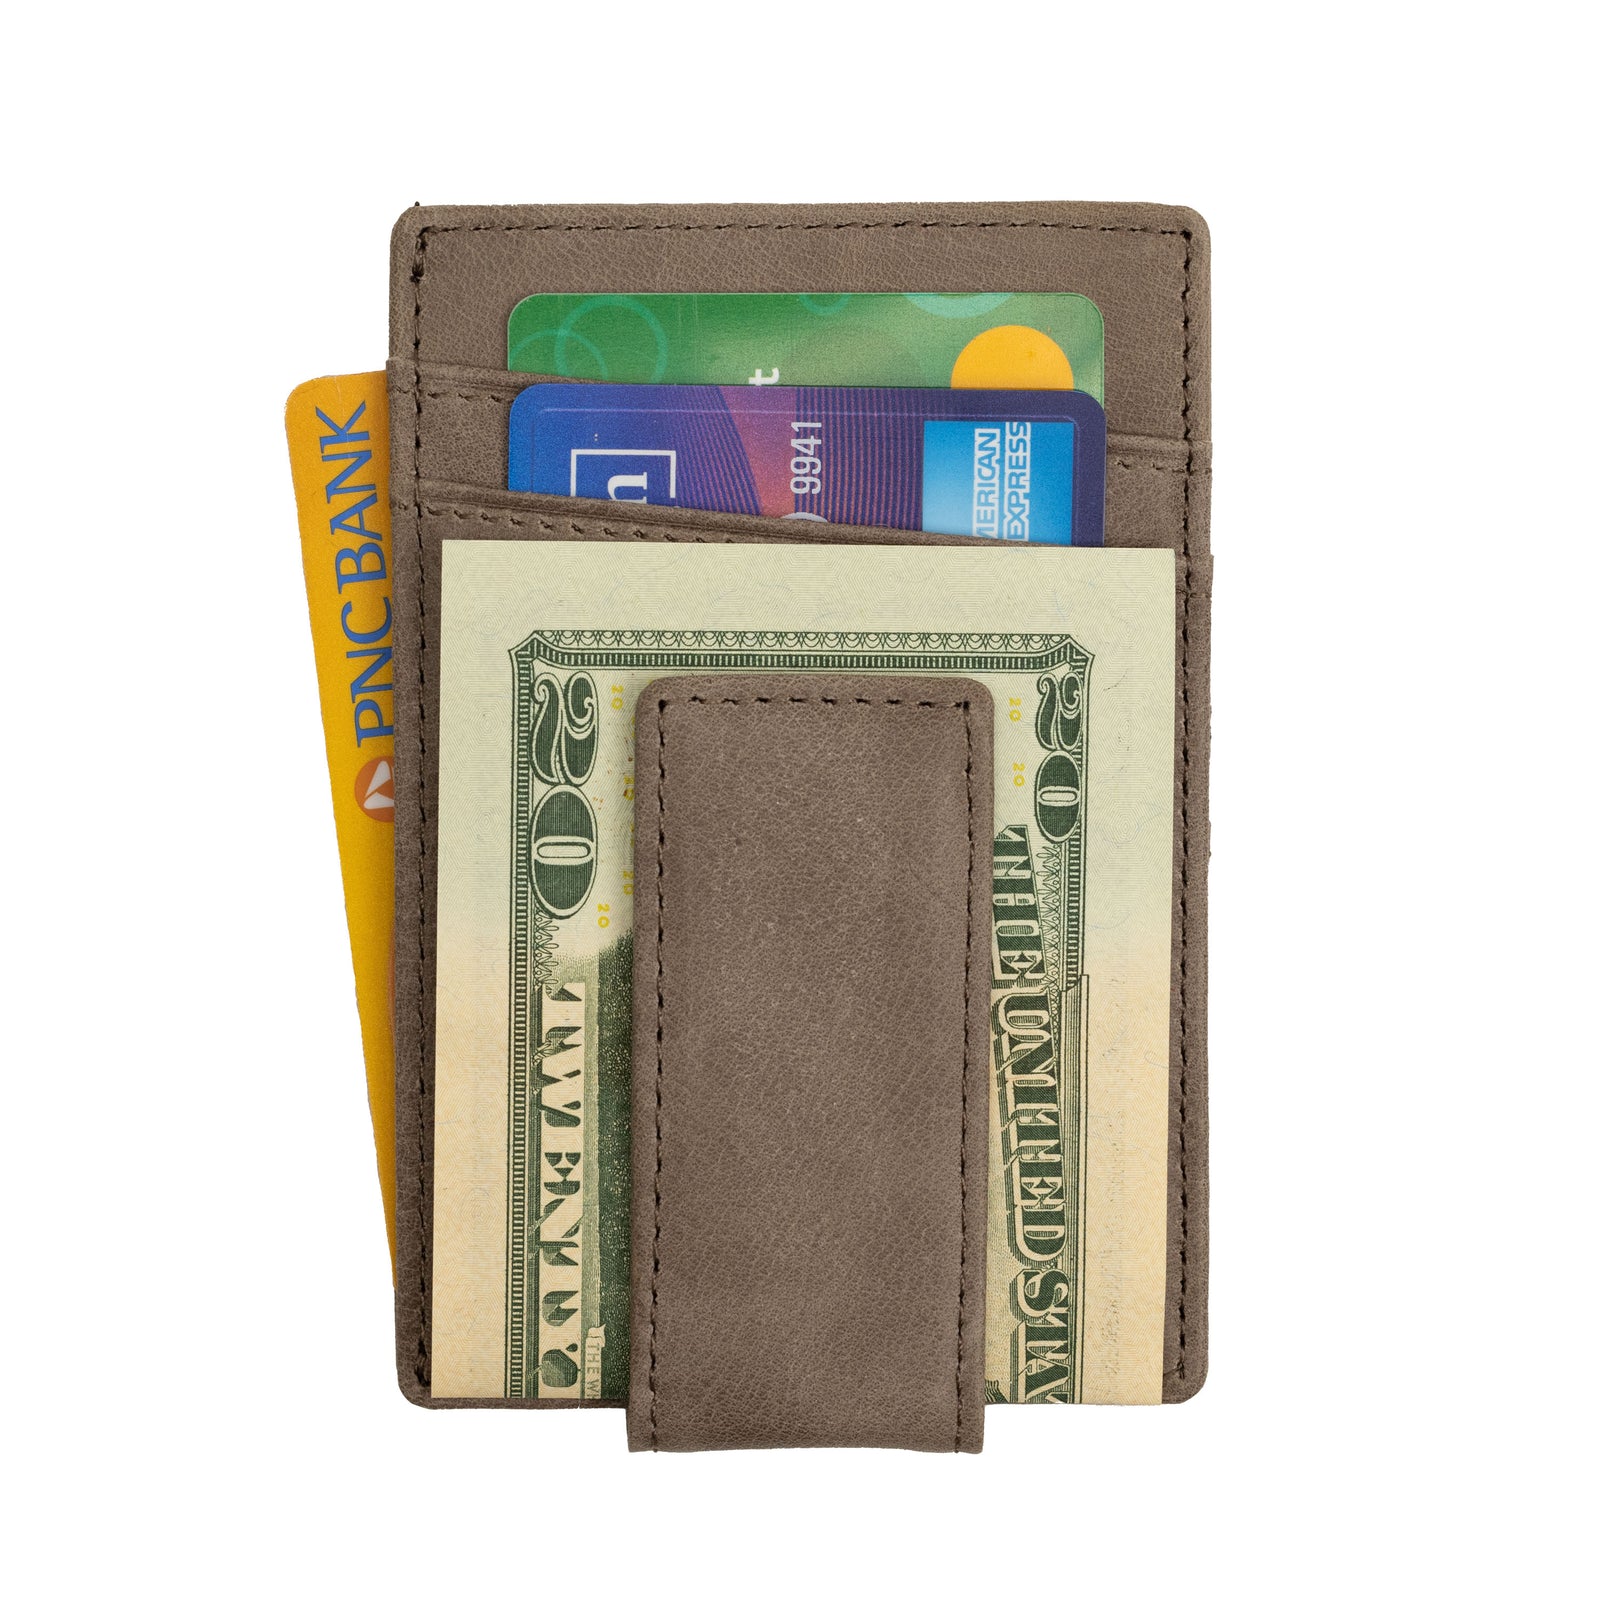 Forest Wooden Credit Card Holder Wallet With Money Clip and 